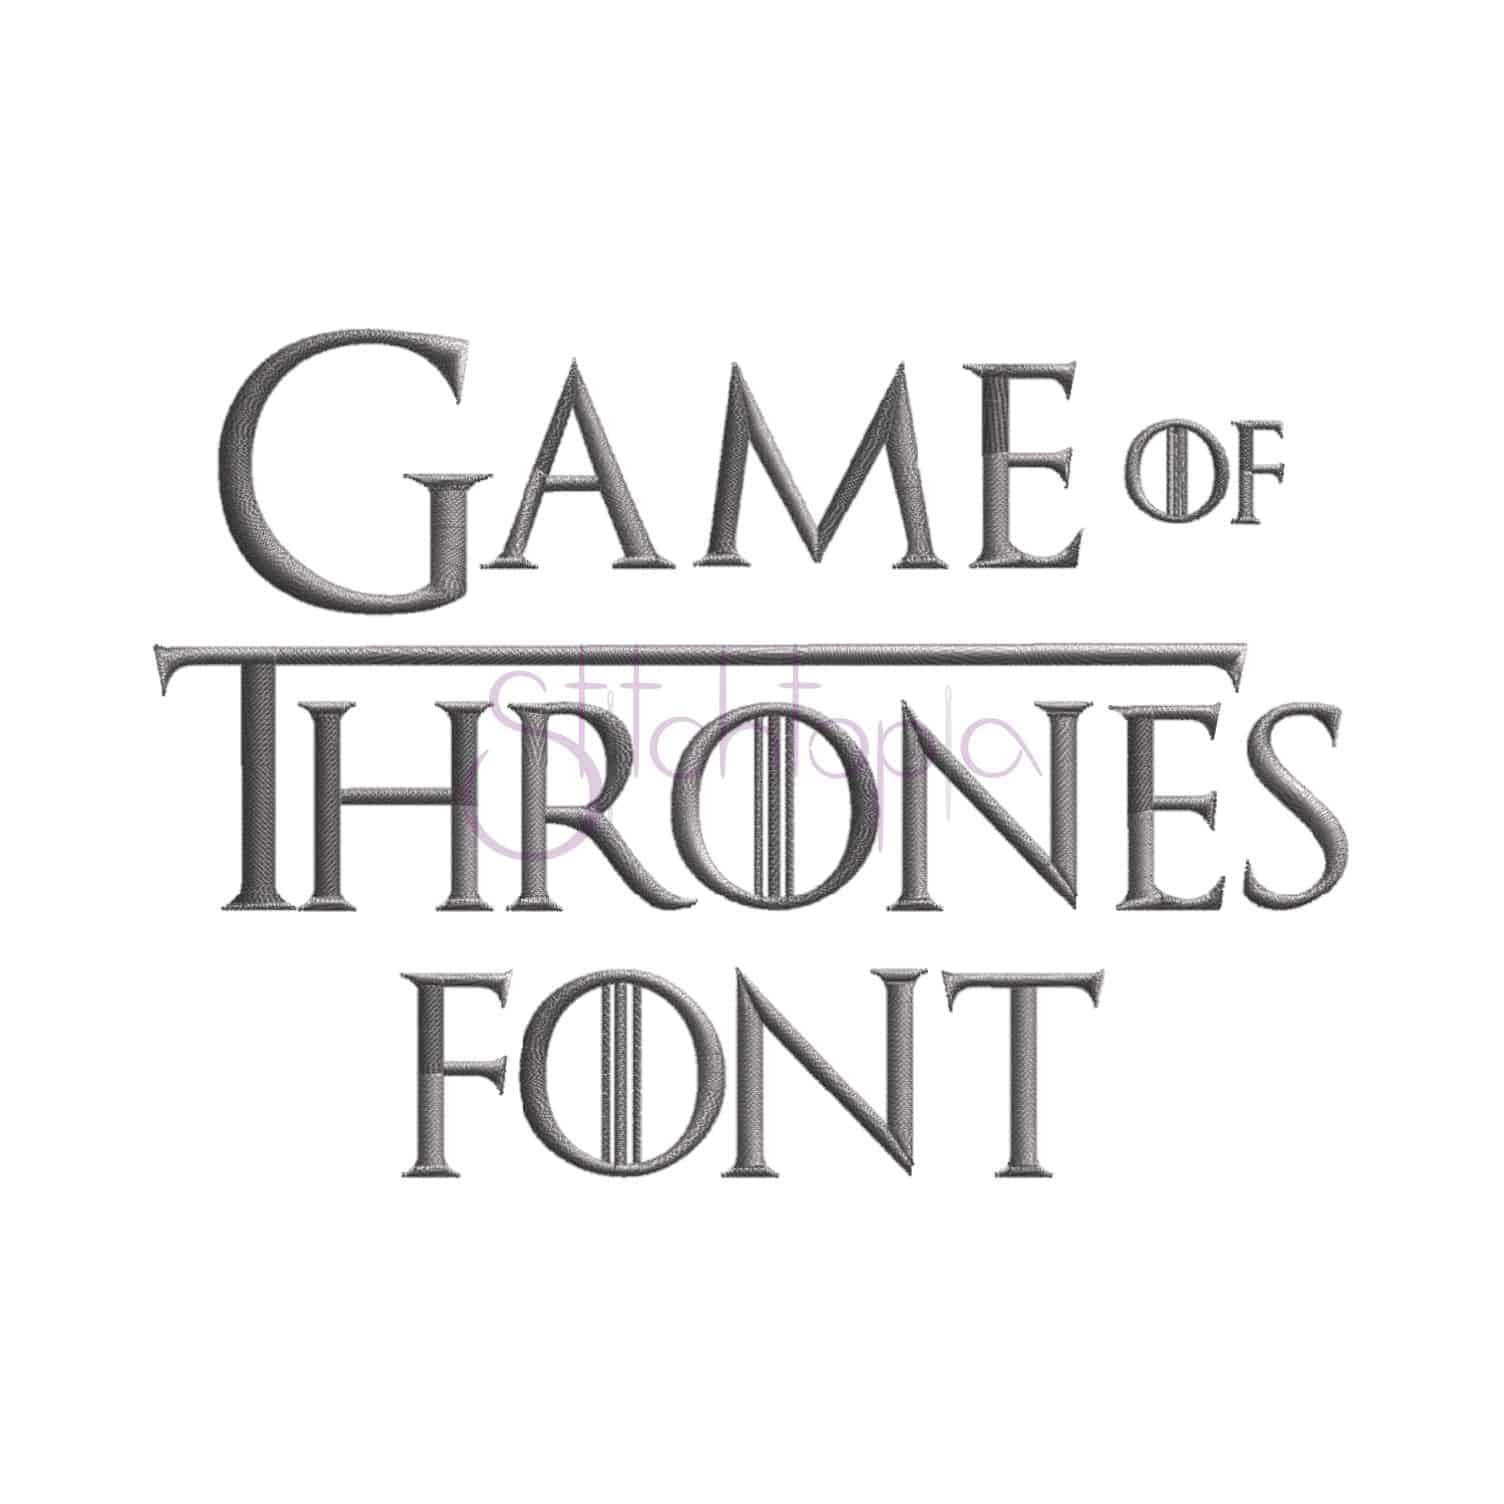 Game Of Thrones Embroidery Font 75 1 1 5 2 2 5 Stitchtopia